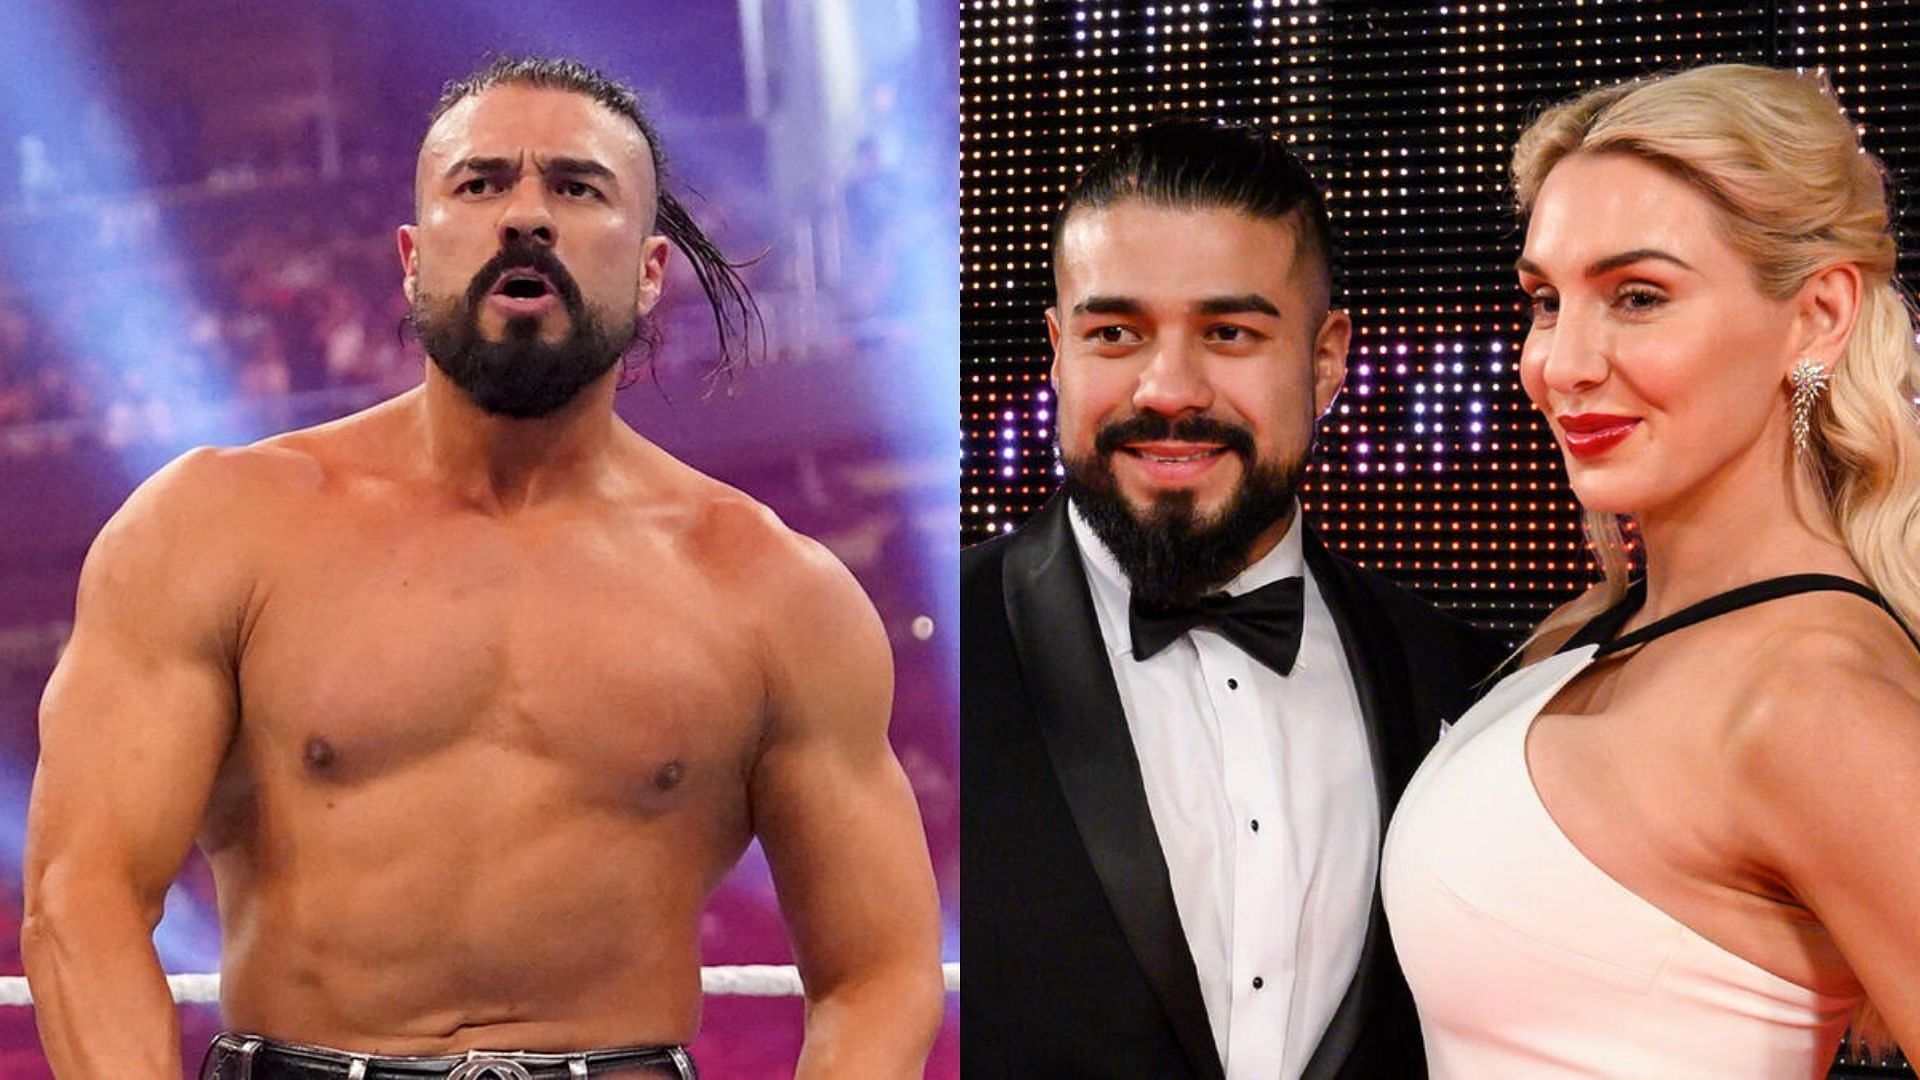 Andrade and Charlotte Flair are married to one other